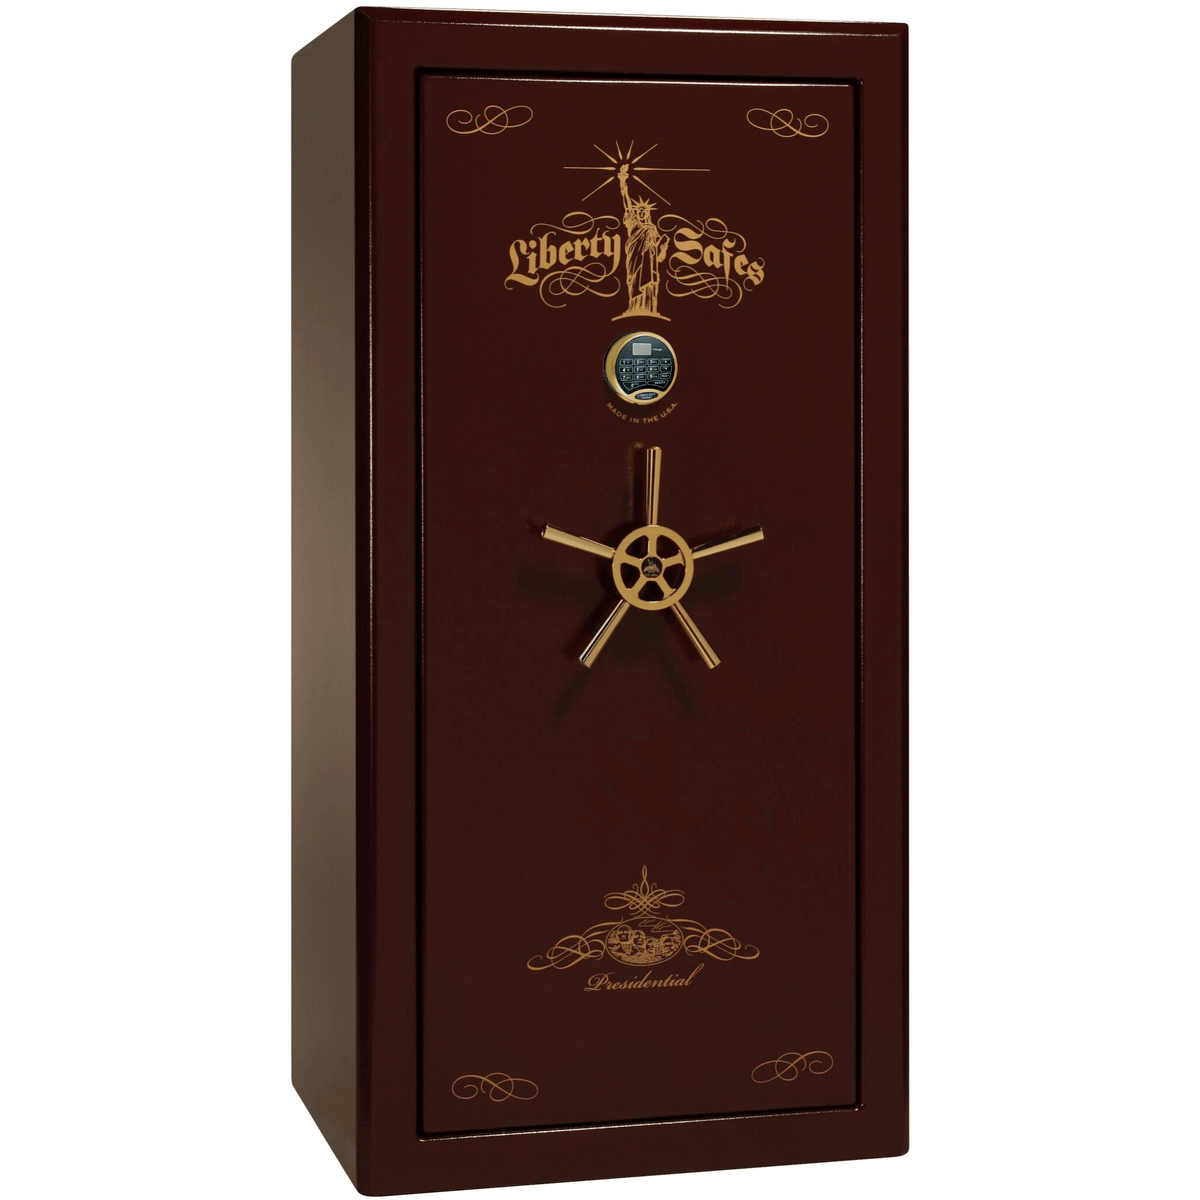 Liberty Safe Presidential 25 in Burgundy Marble with 24k Gold Electronic Lock, closed door.